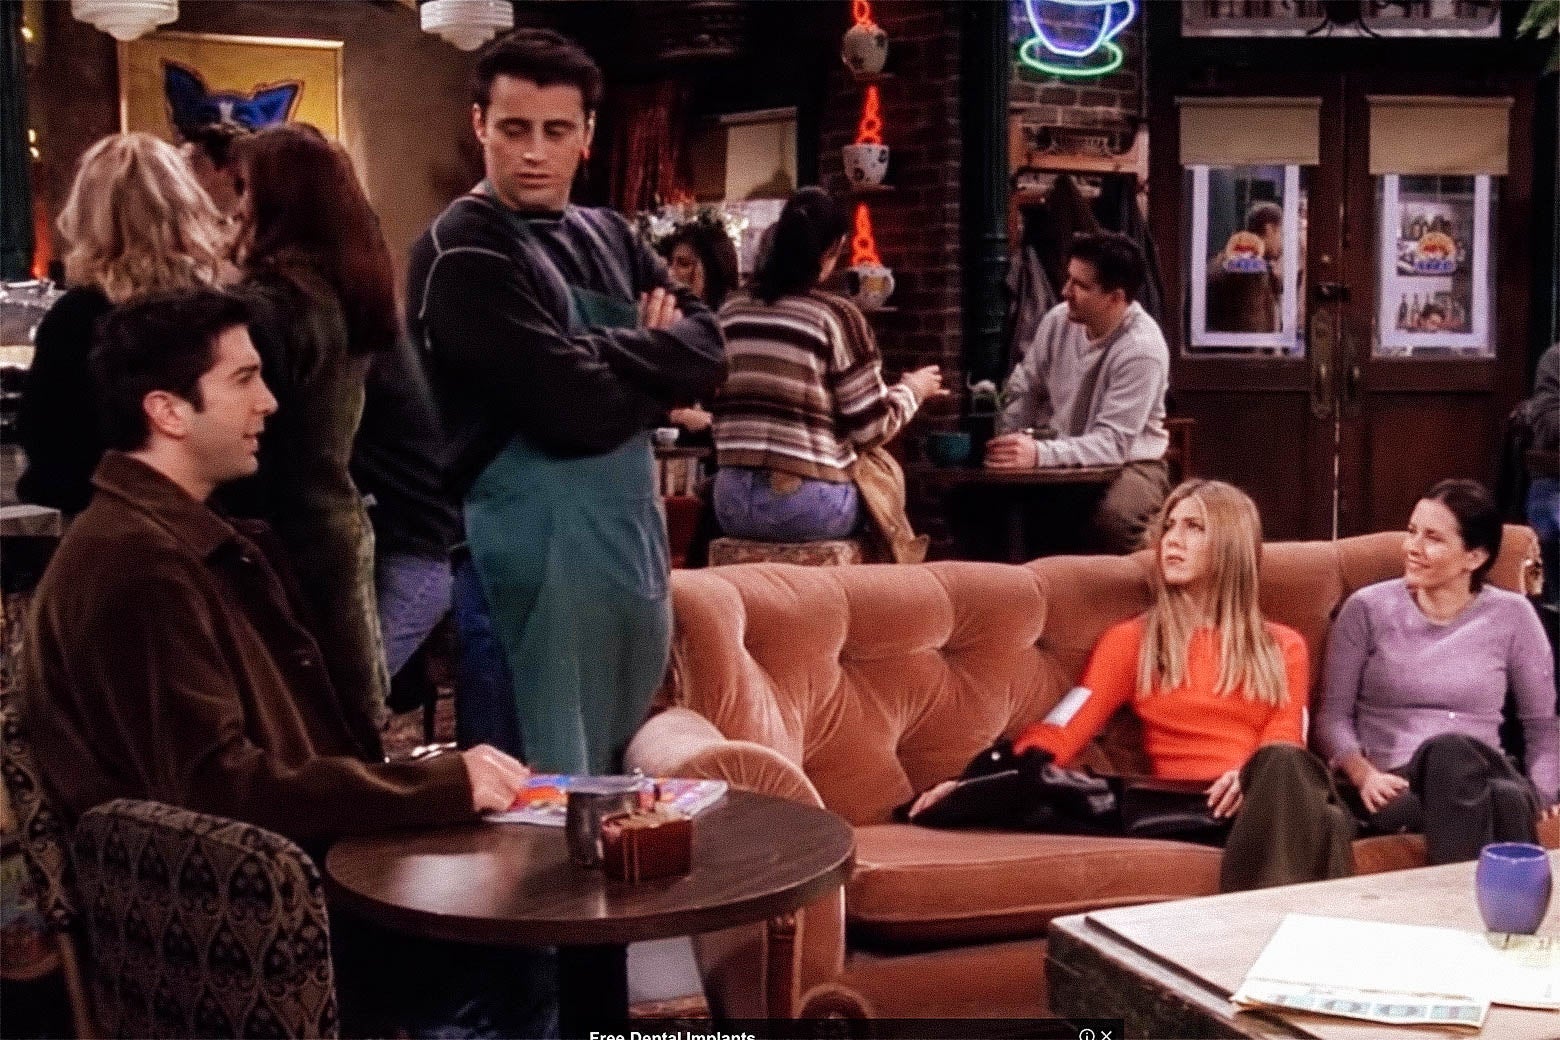 The cast of Friends at Central Perk.